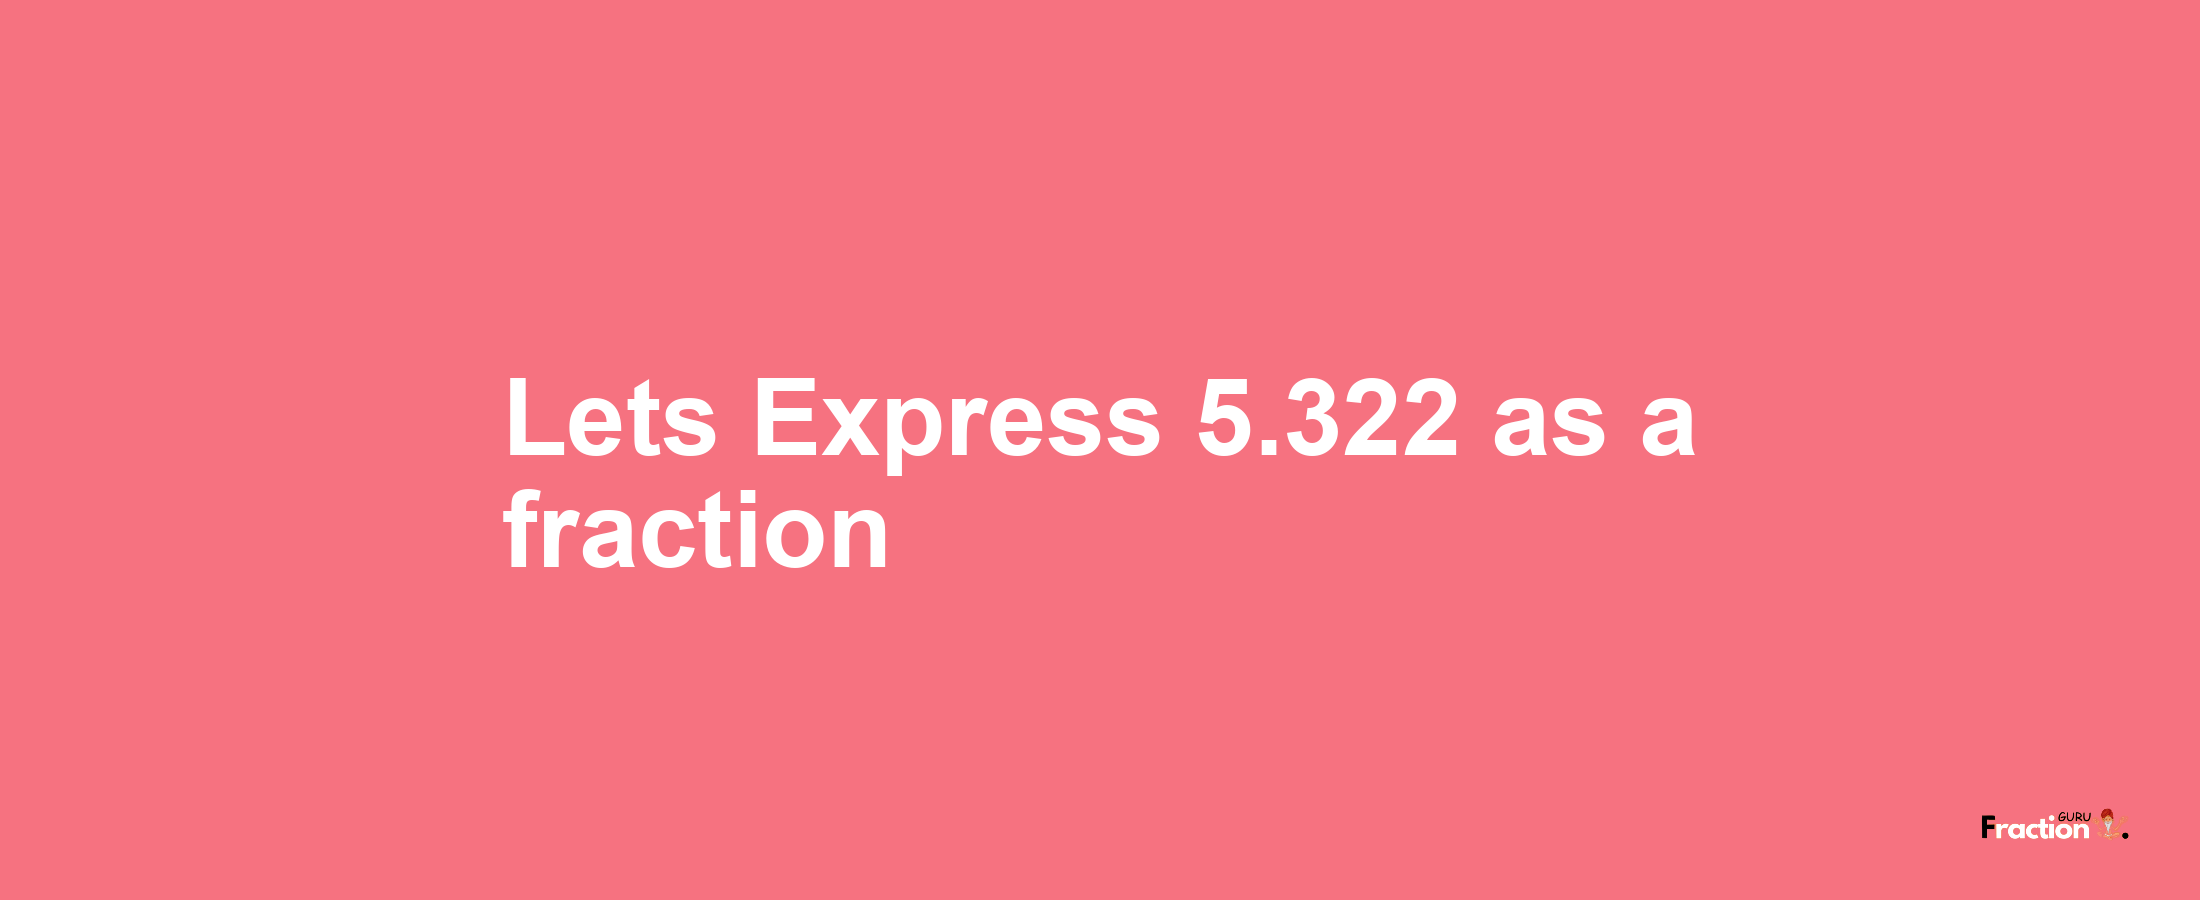 Lets Express 5.322 as afraction